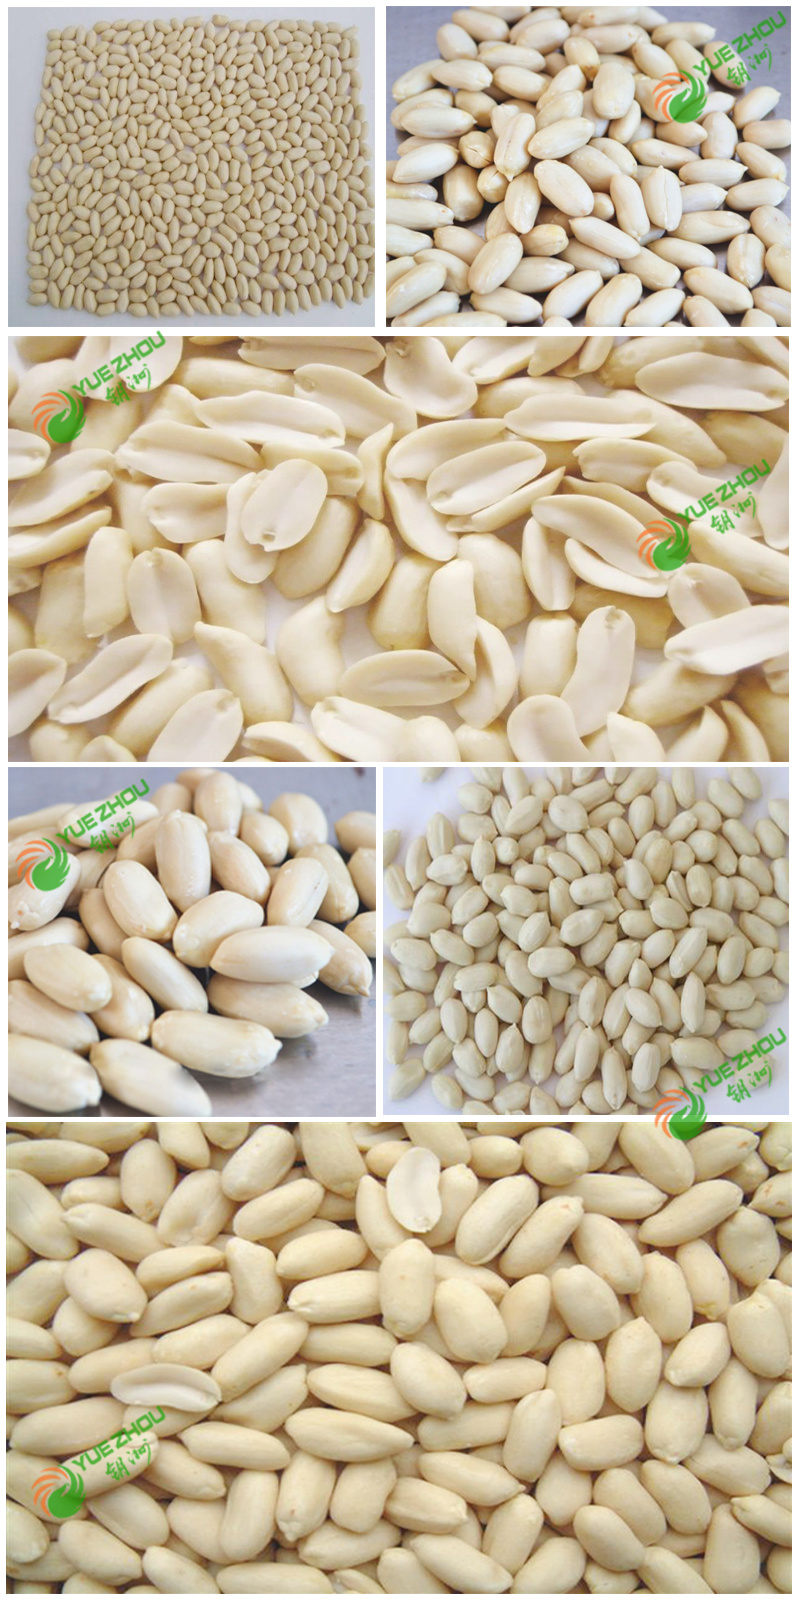 Tasted Spicy Peanut Kernels From Shandong for Hot Sell